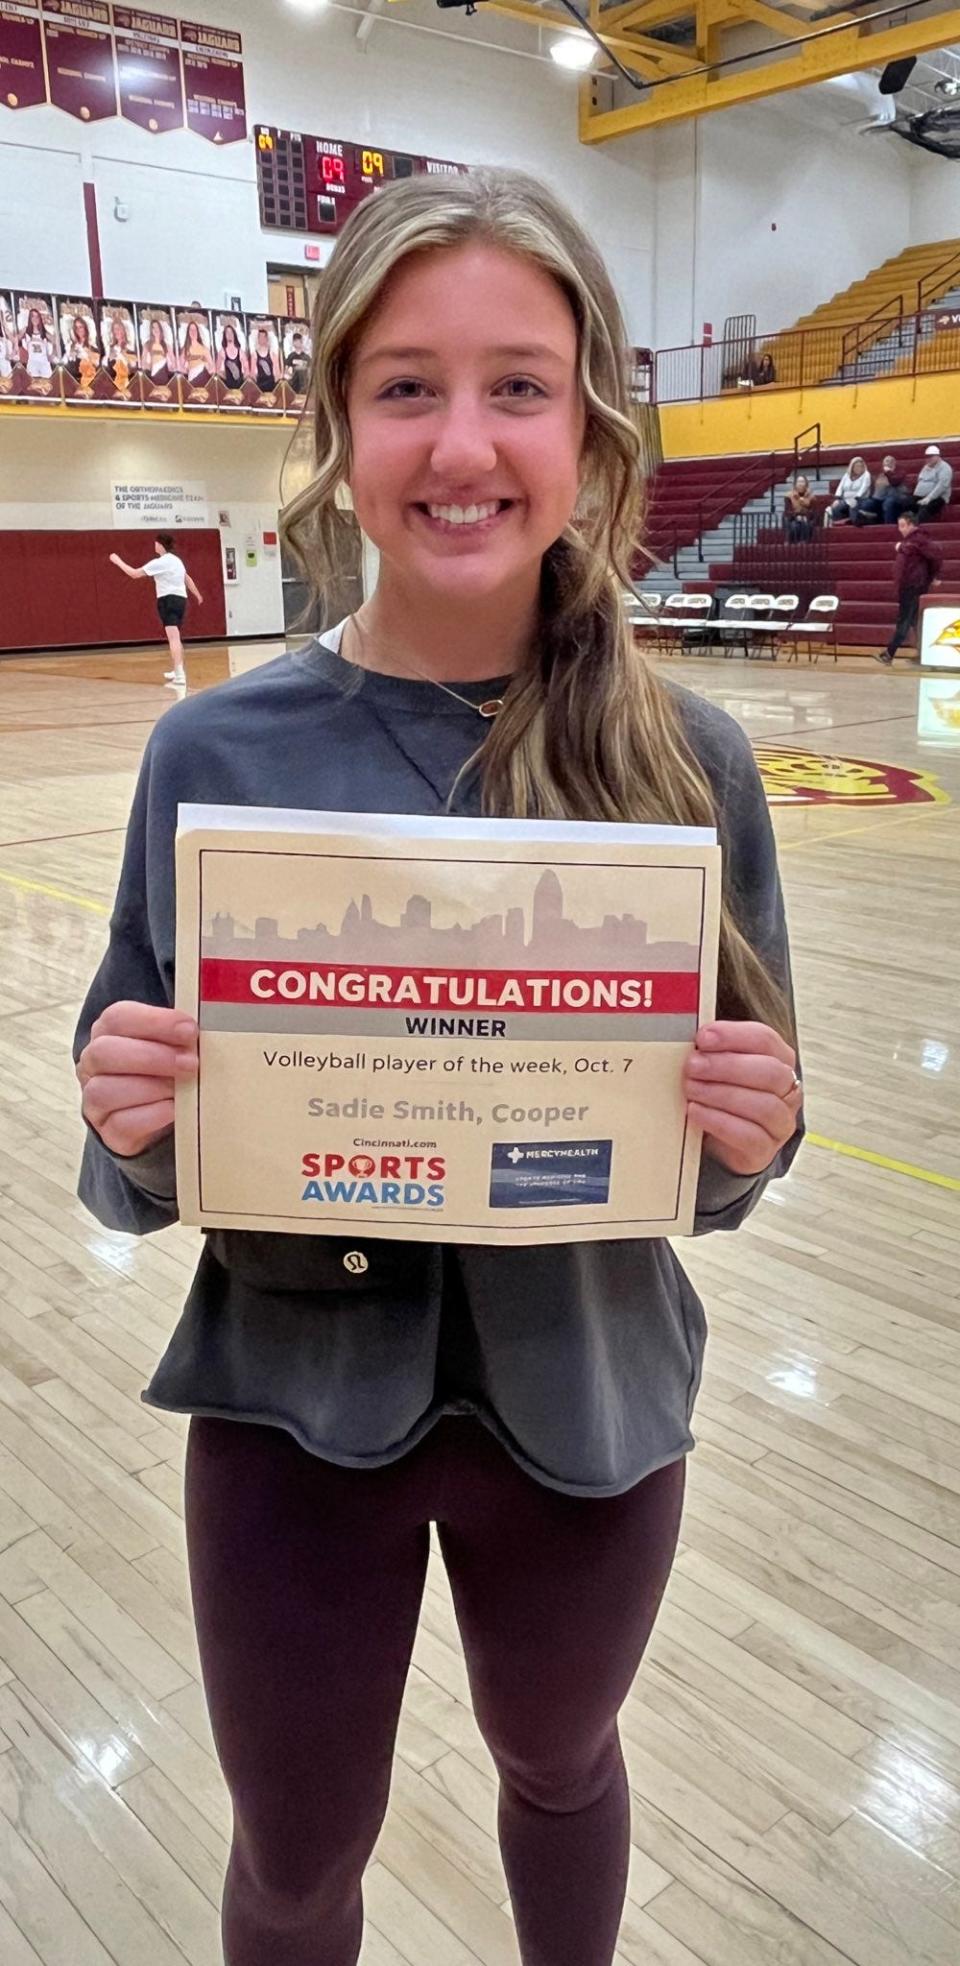 Sadie Smith of Cooper shares the certificate she earned as the cincinnati.com volleyball player of the week for Oct. 7.